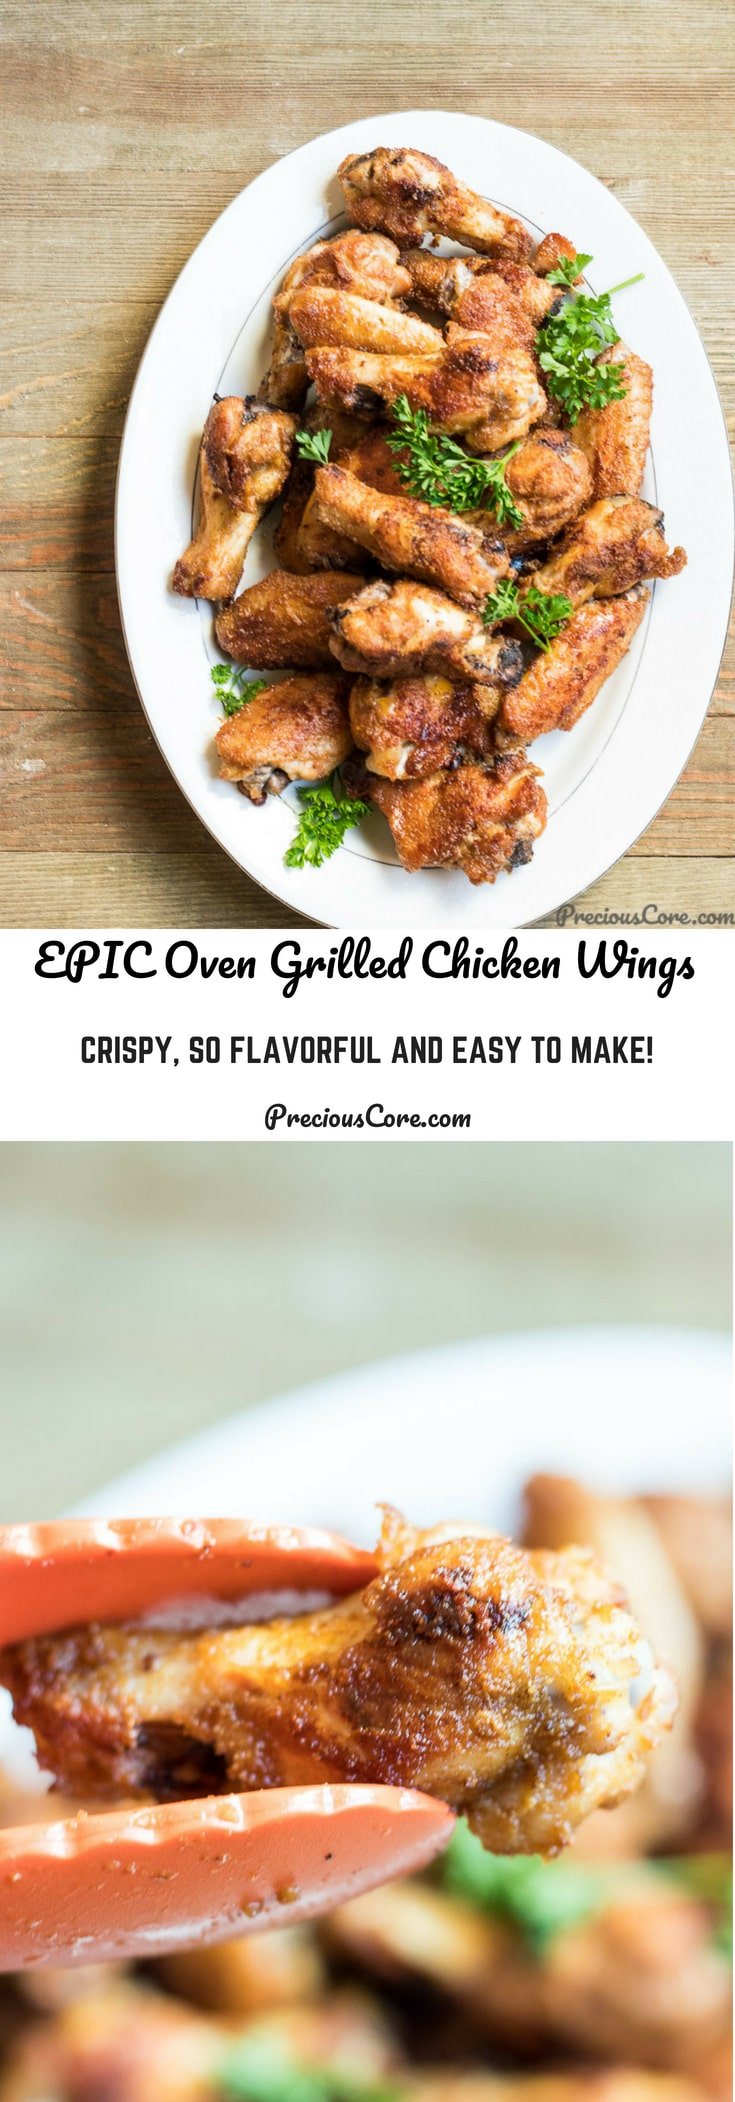 Collage with text \"Epic Oven Grilled Chicken Wings Crispy, So Flavorful and Easy to Make!\"